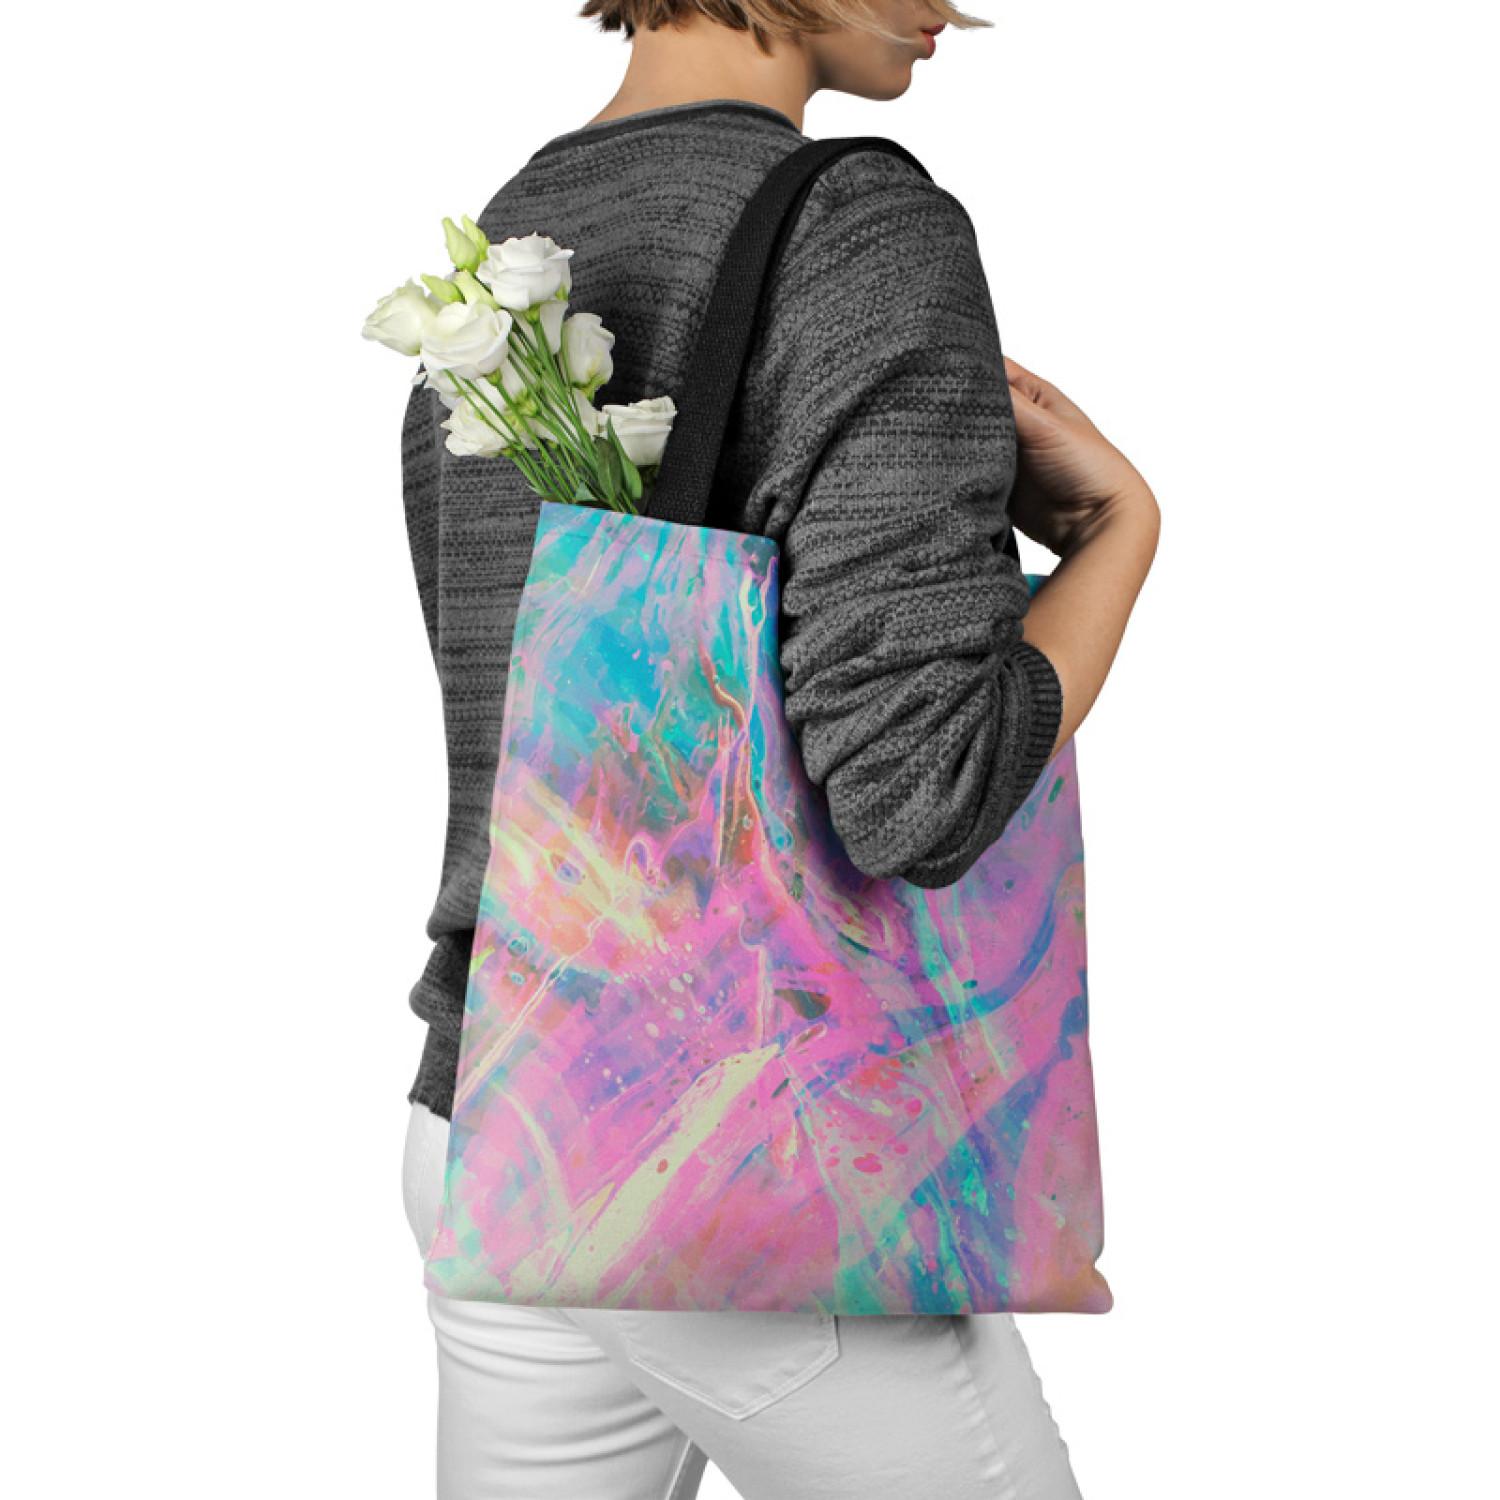 Shopping Bag Liquid cosmos - an abstract graphics in holographic style